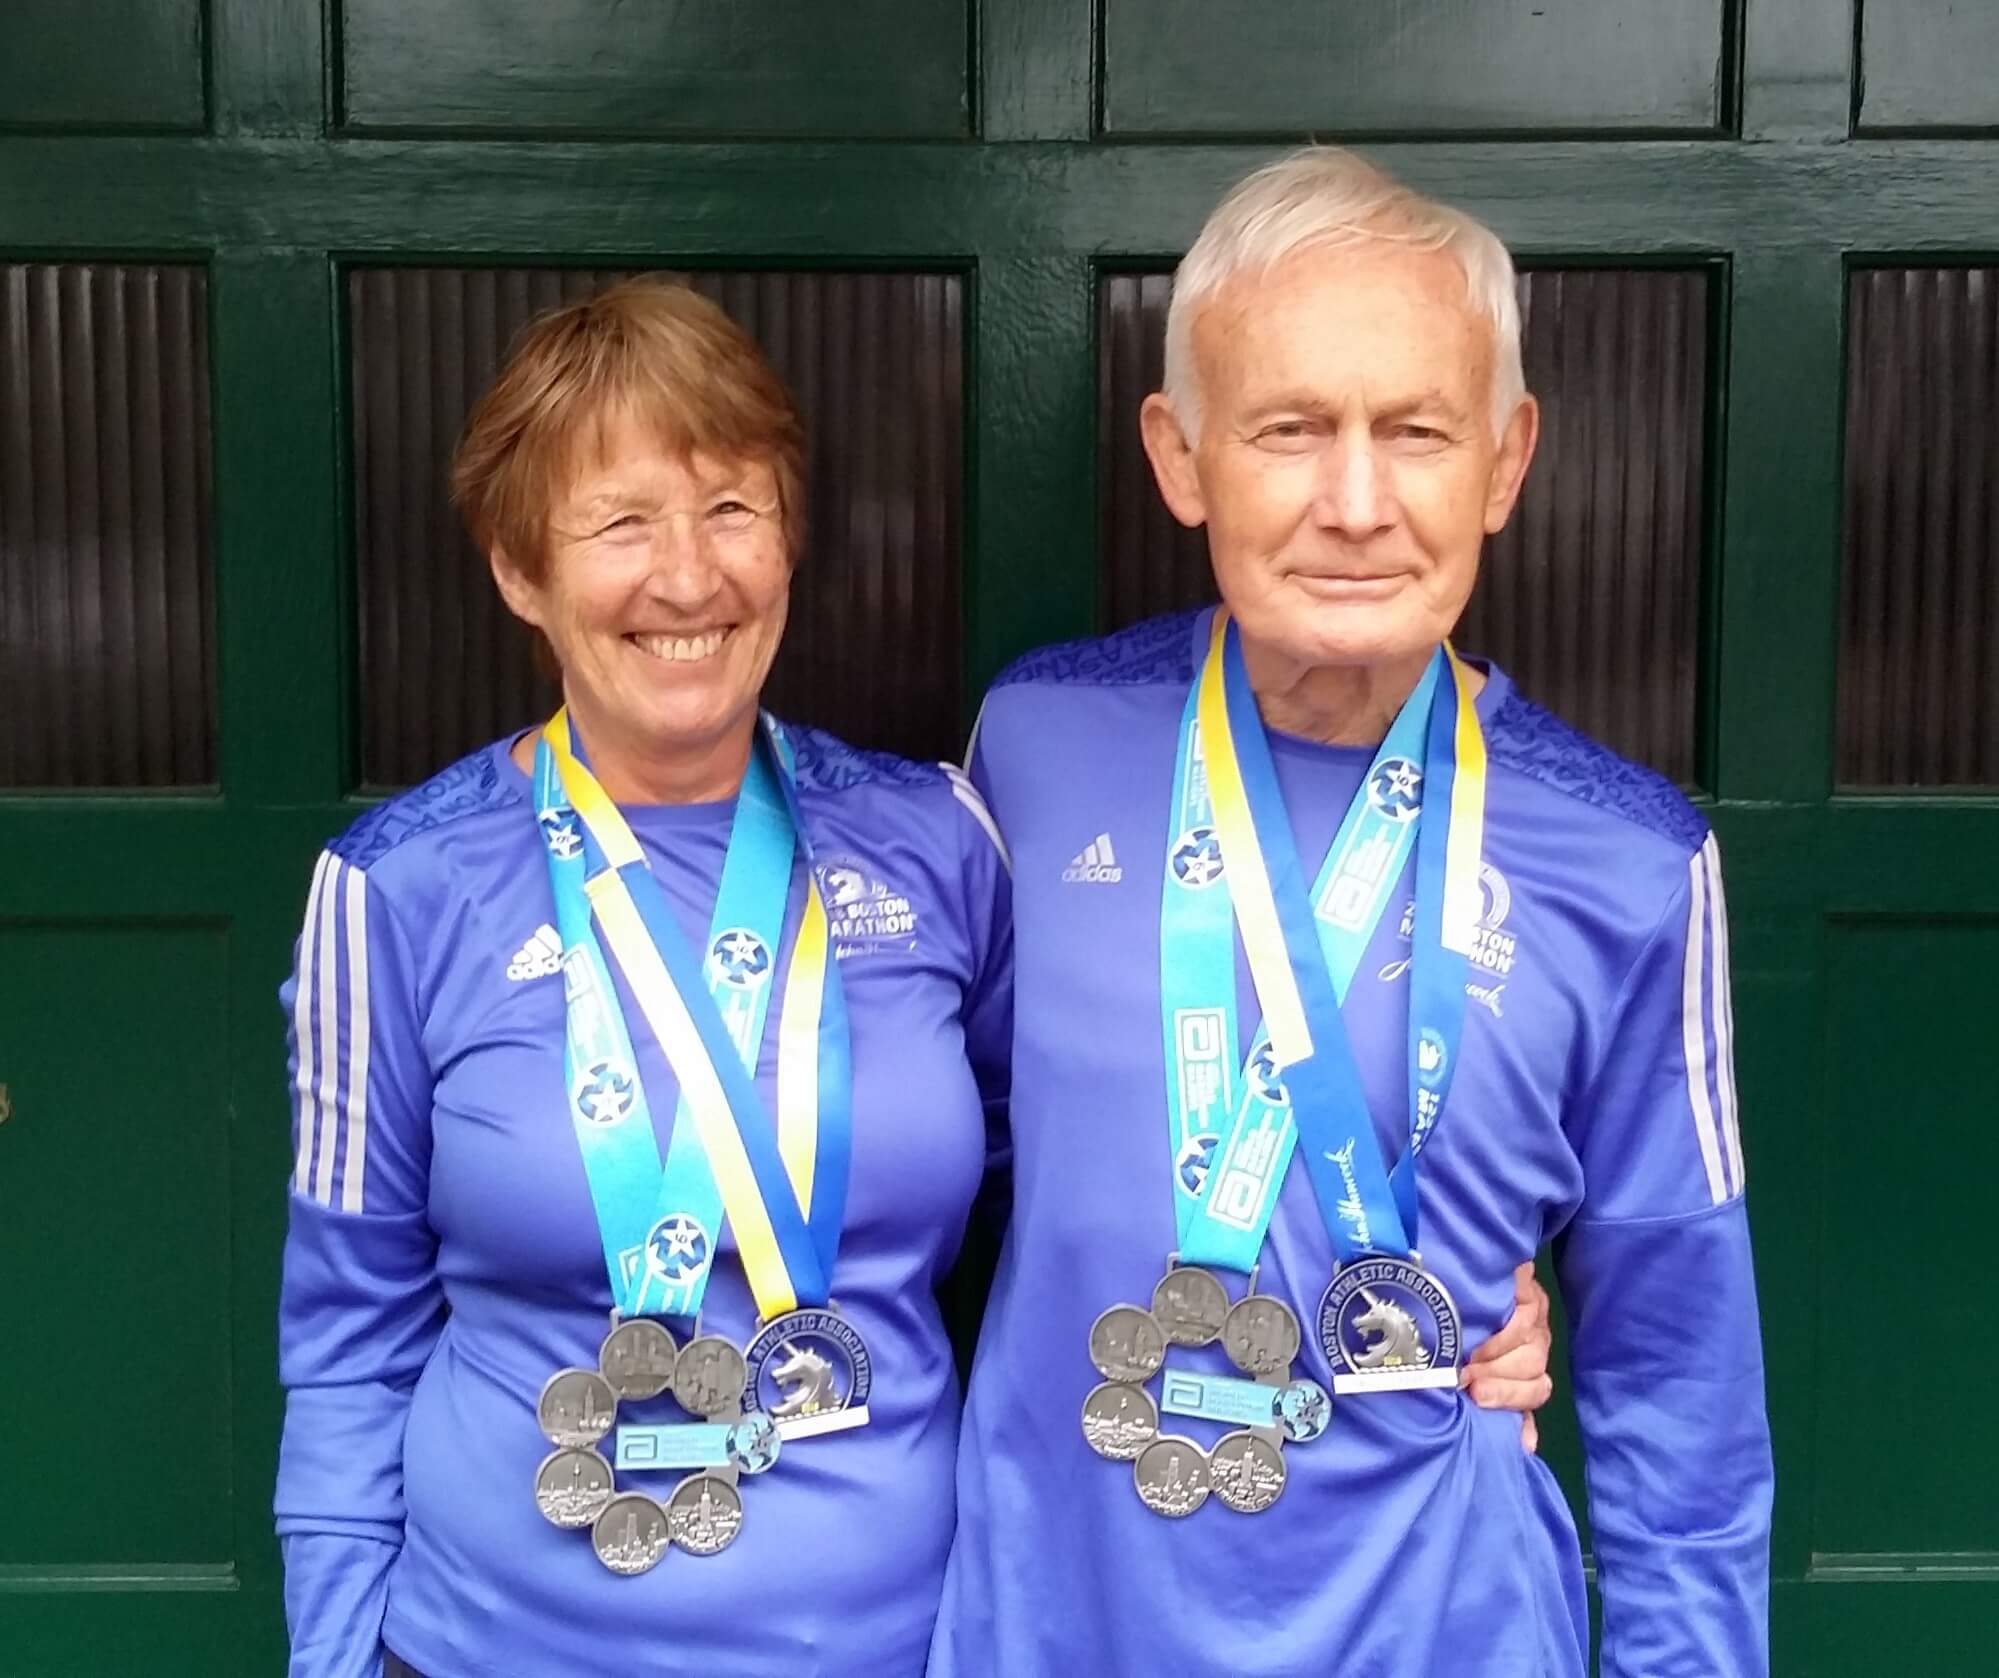 Jane and Terry celebrating completing the big 5 marathons with their medals